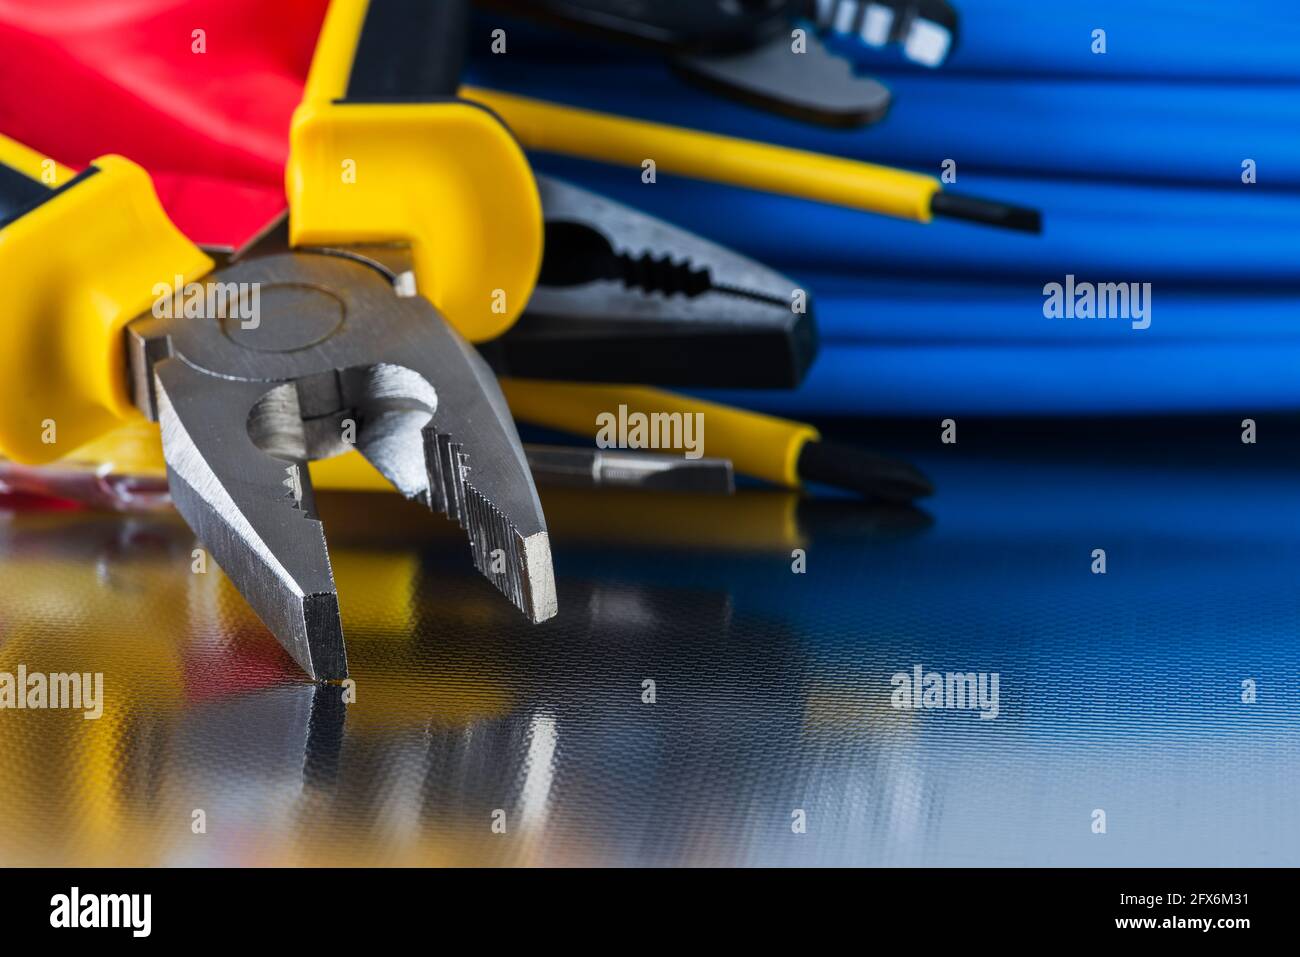 Electrical installation tool and cabling close-up shiny workshop background Stock Photo